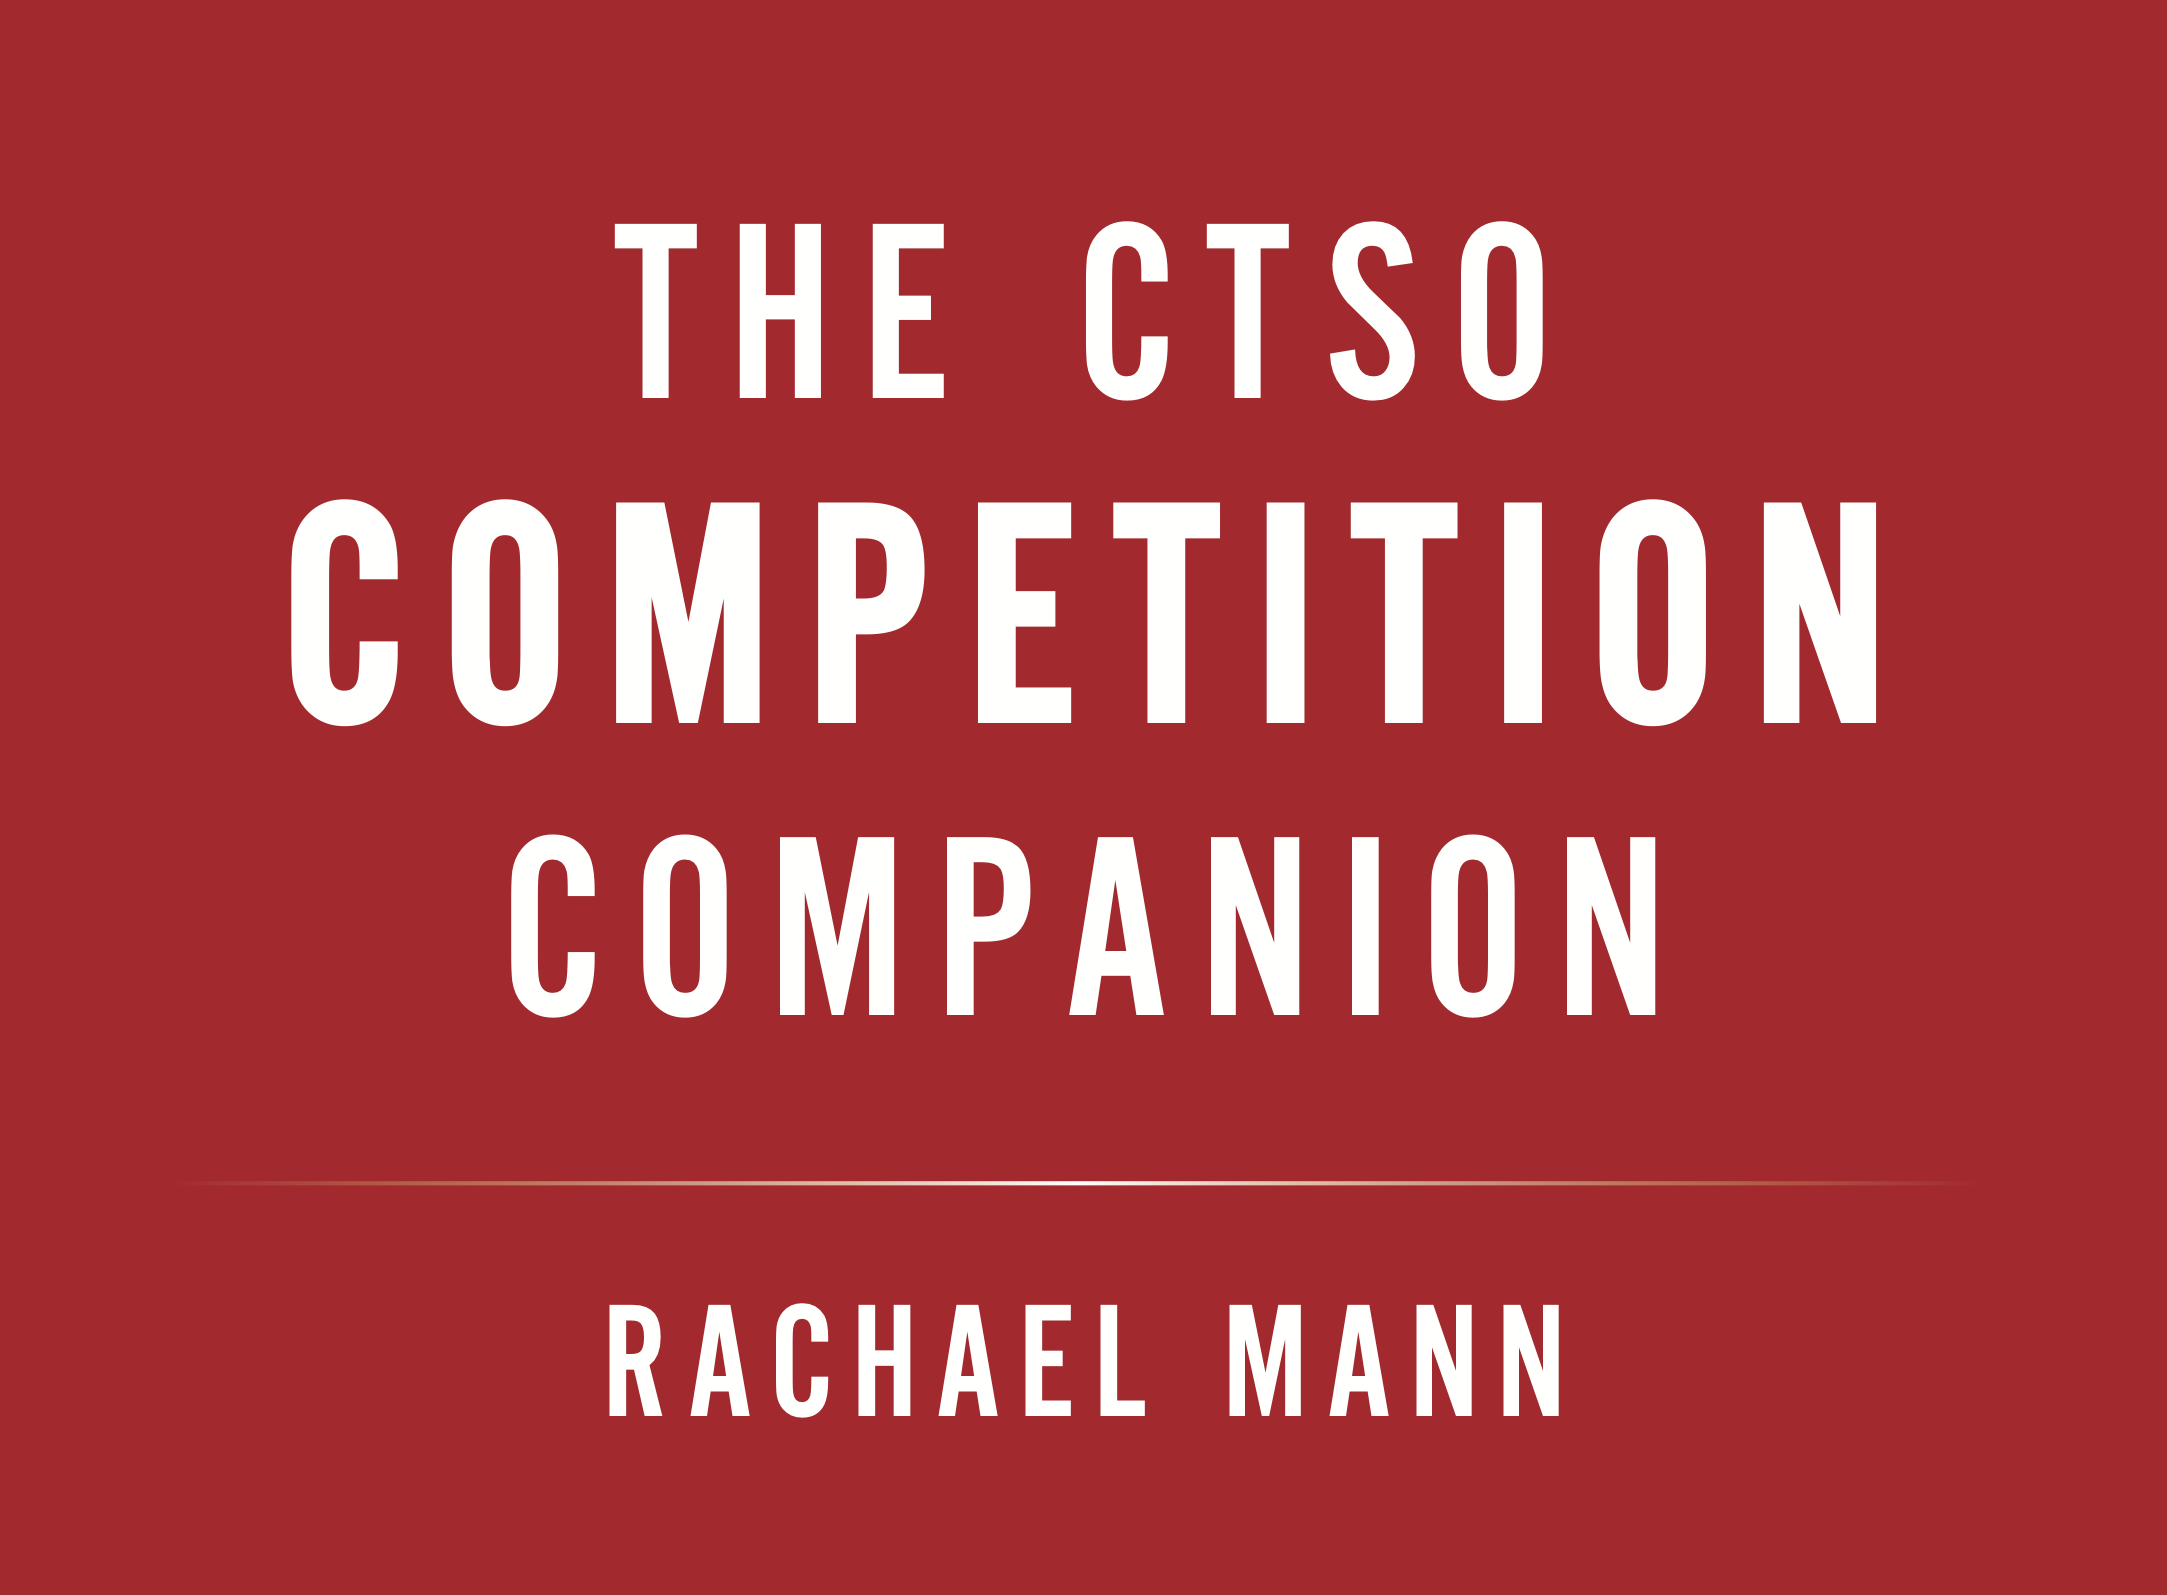 Rachael Mann on The CTSO Competition Companion & COVID-19